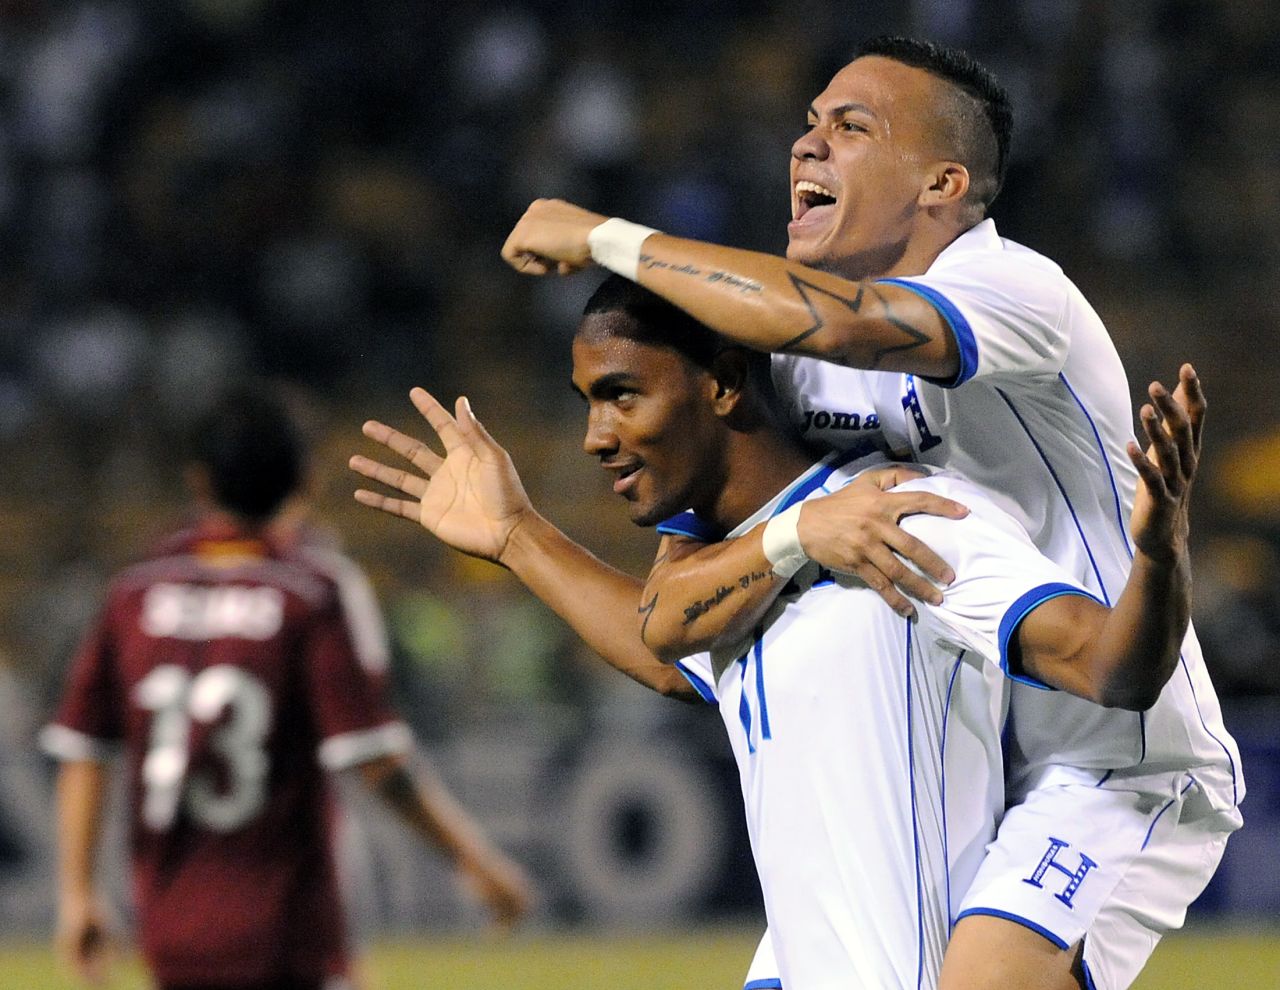 Peralta earned 26 caps for his country and played at the London 2012 Olympics where his team earned a shock 1-0 win over Spain.